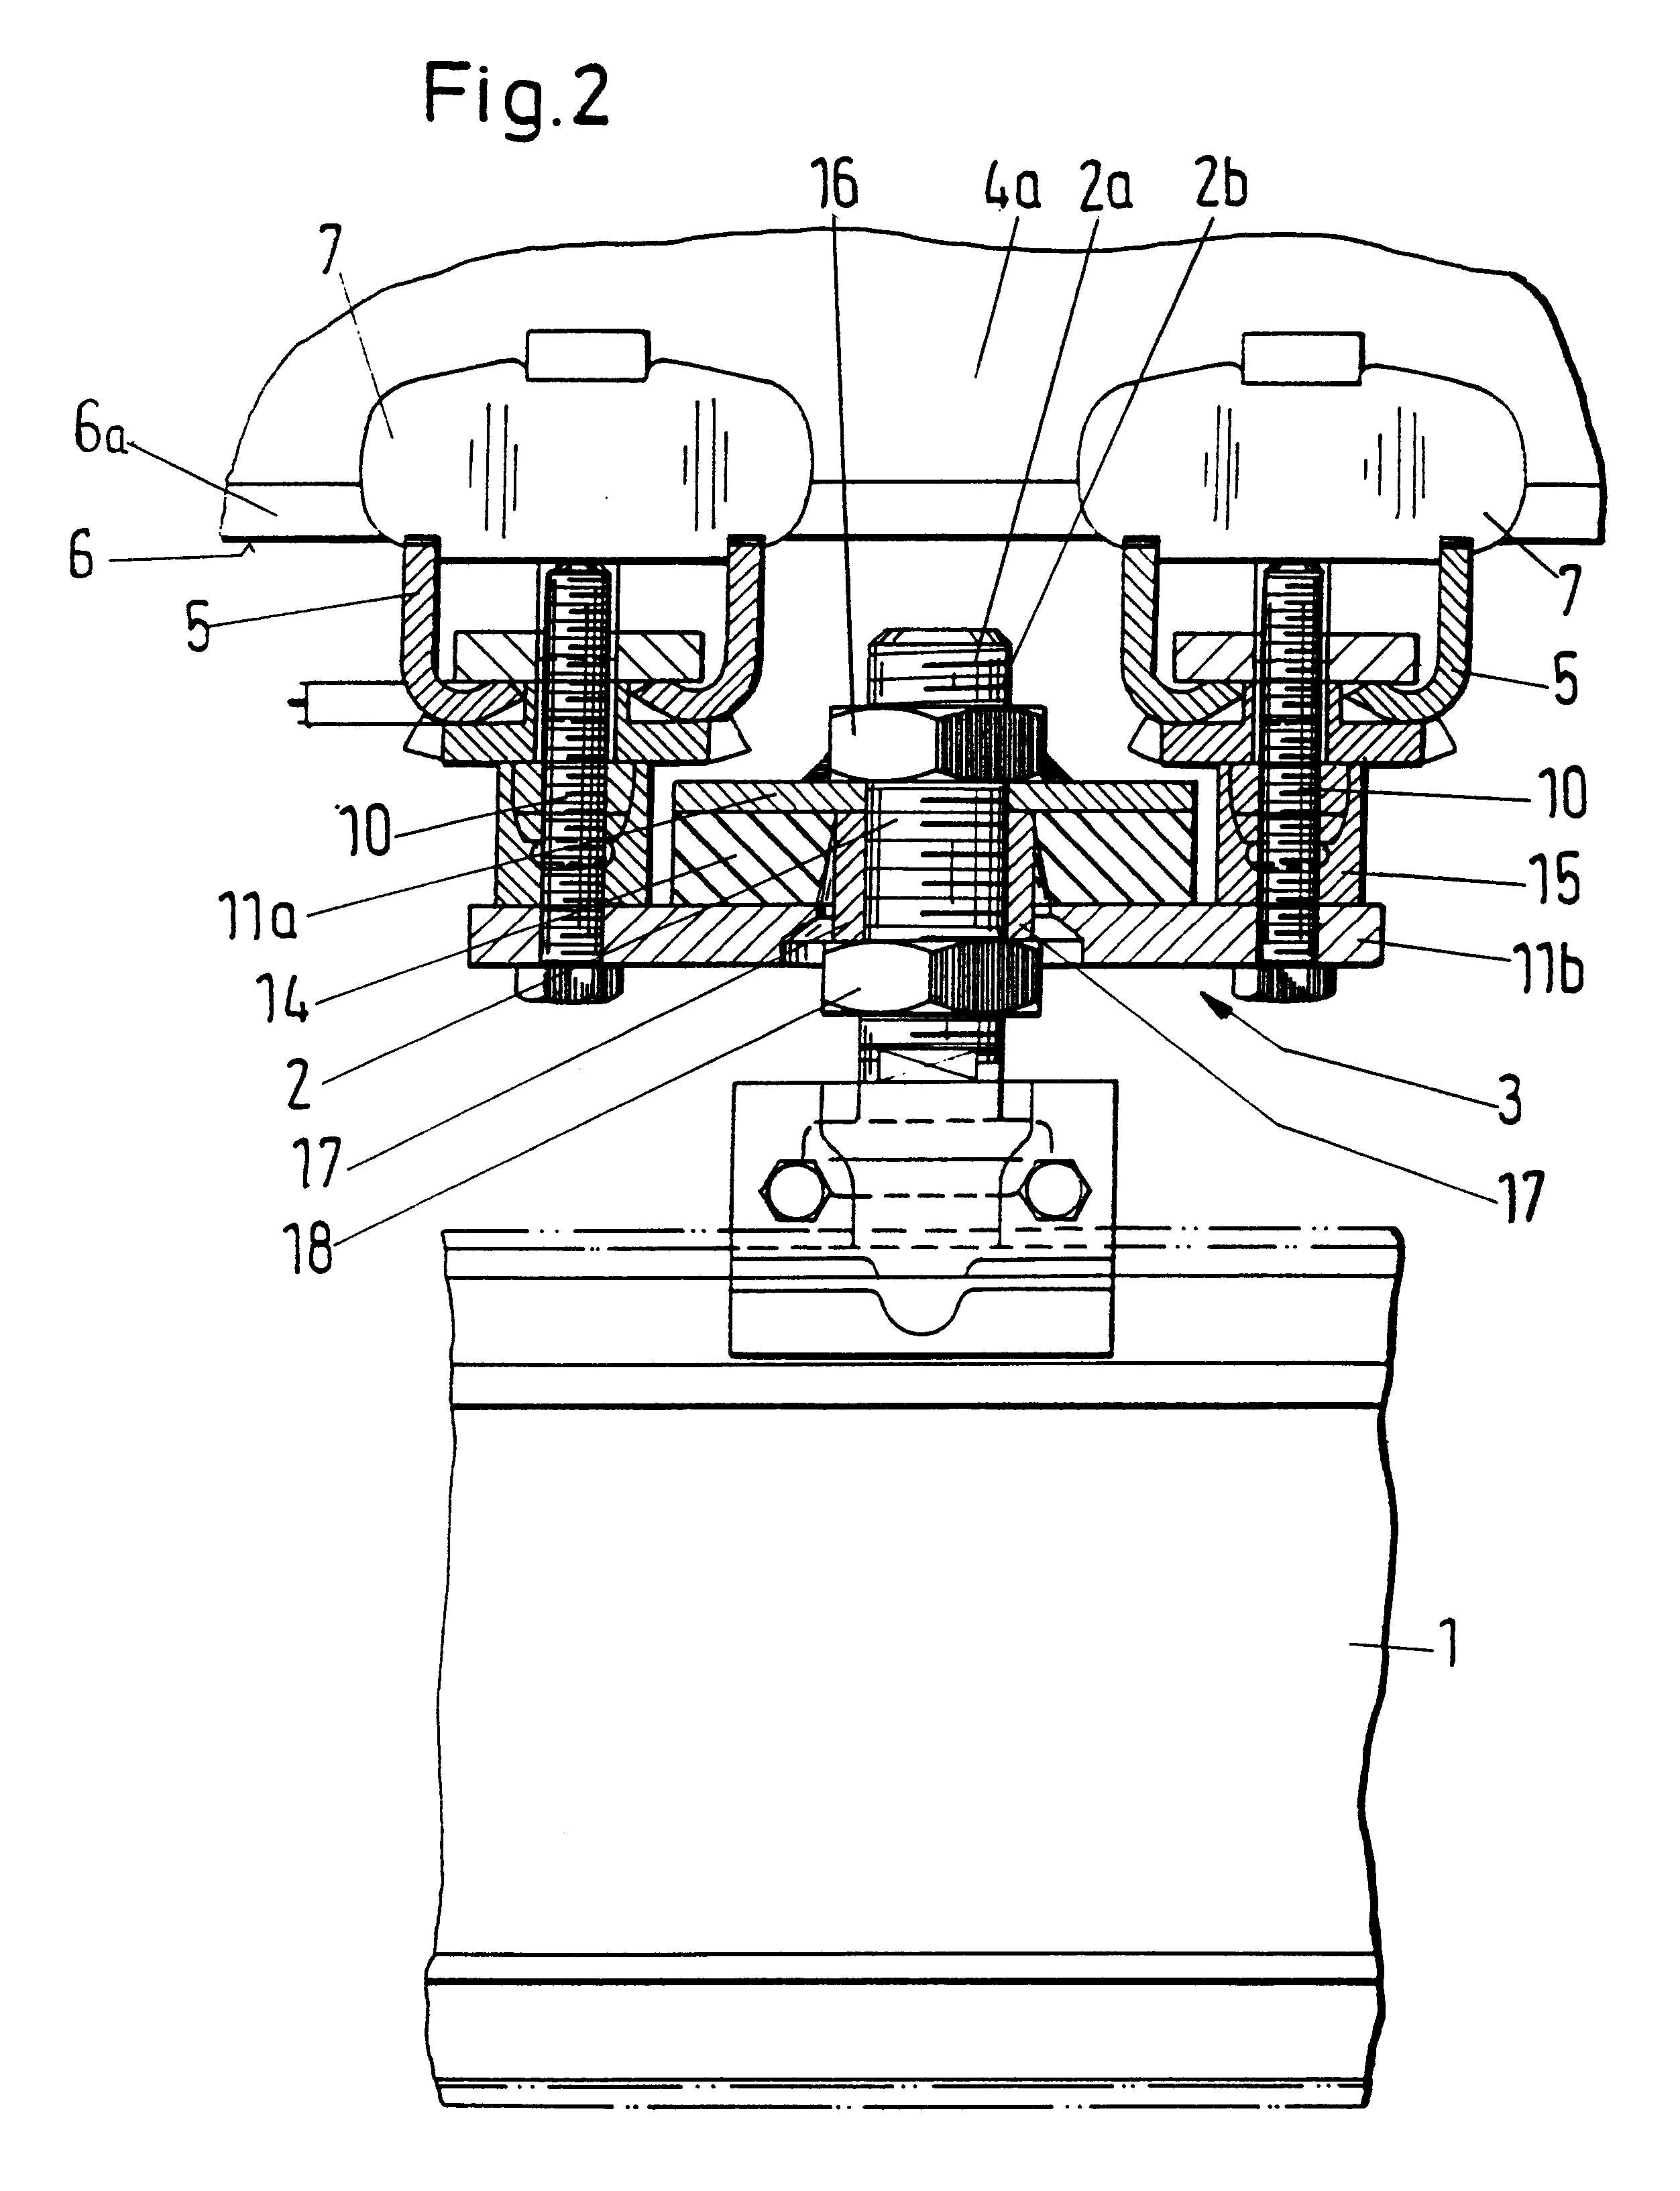 Device for suspension of a hollow section rail which opens downward in a suspension crane